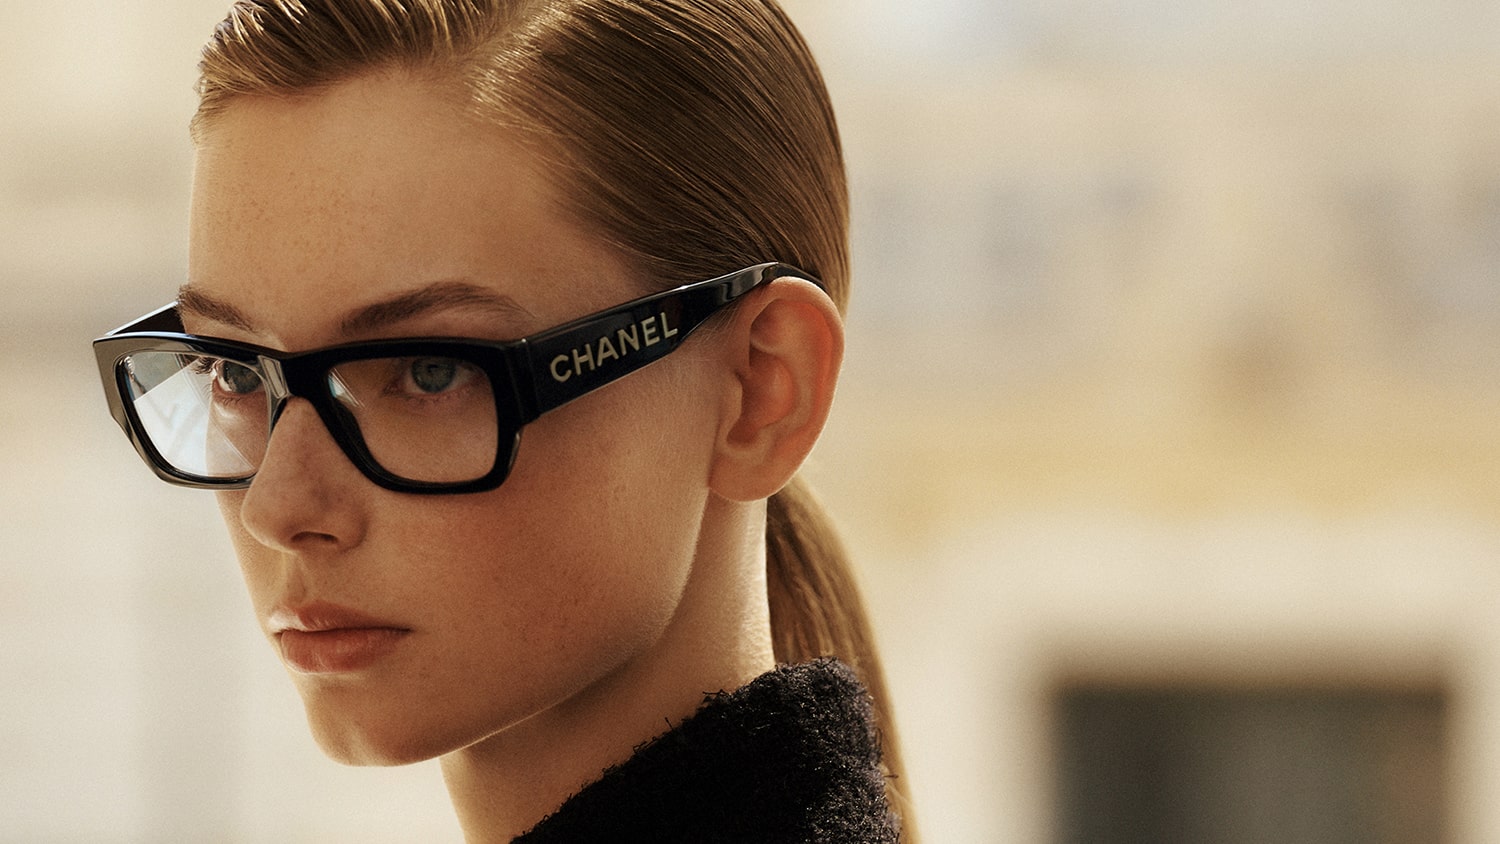 Chanel Eyeglasses Are Now Available At CHANEL.com